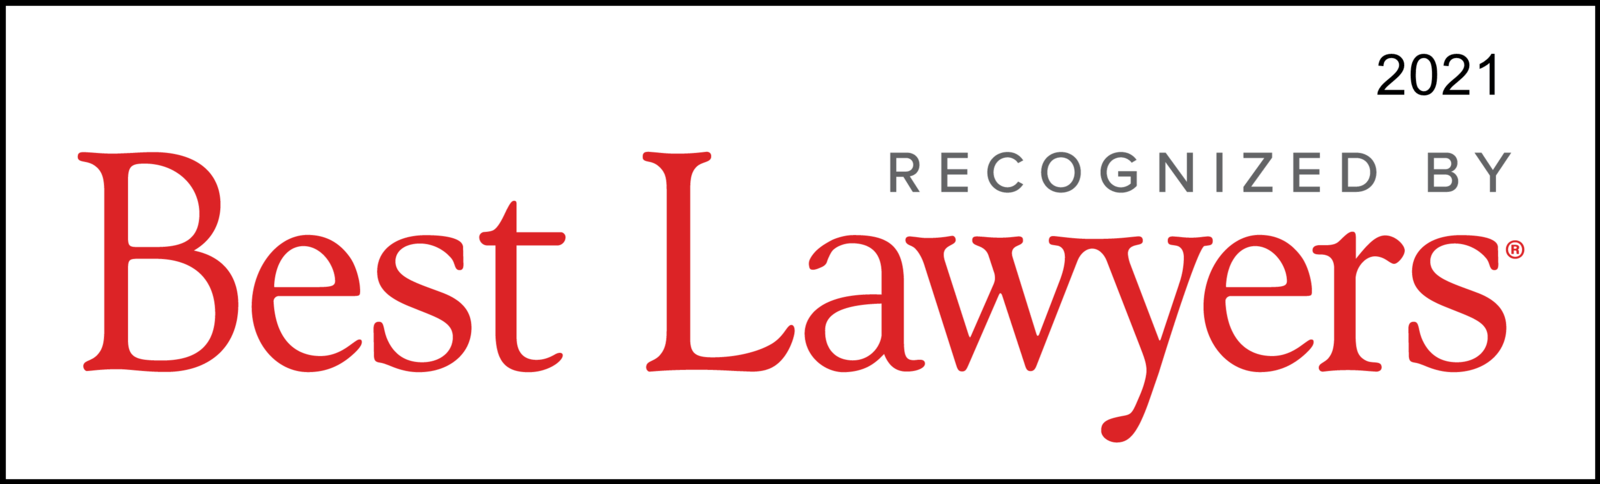 Recognized by best Lawyers 2021